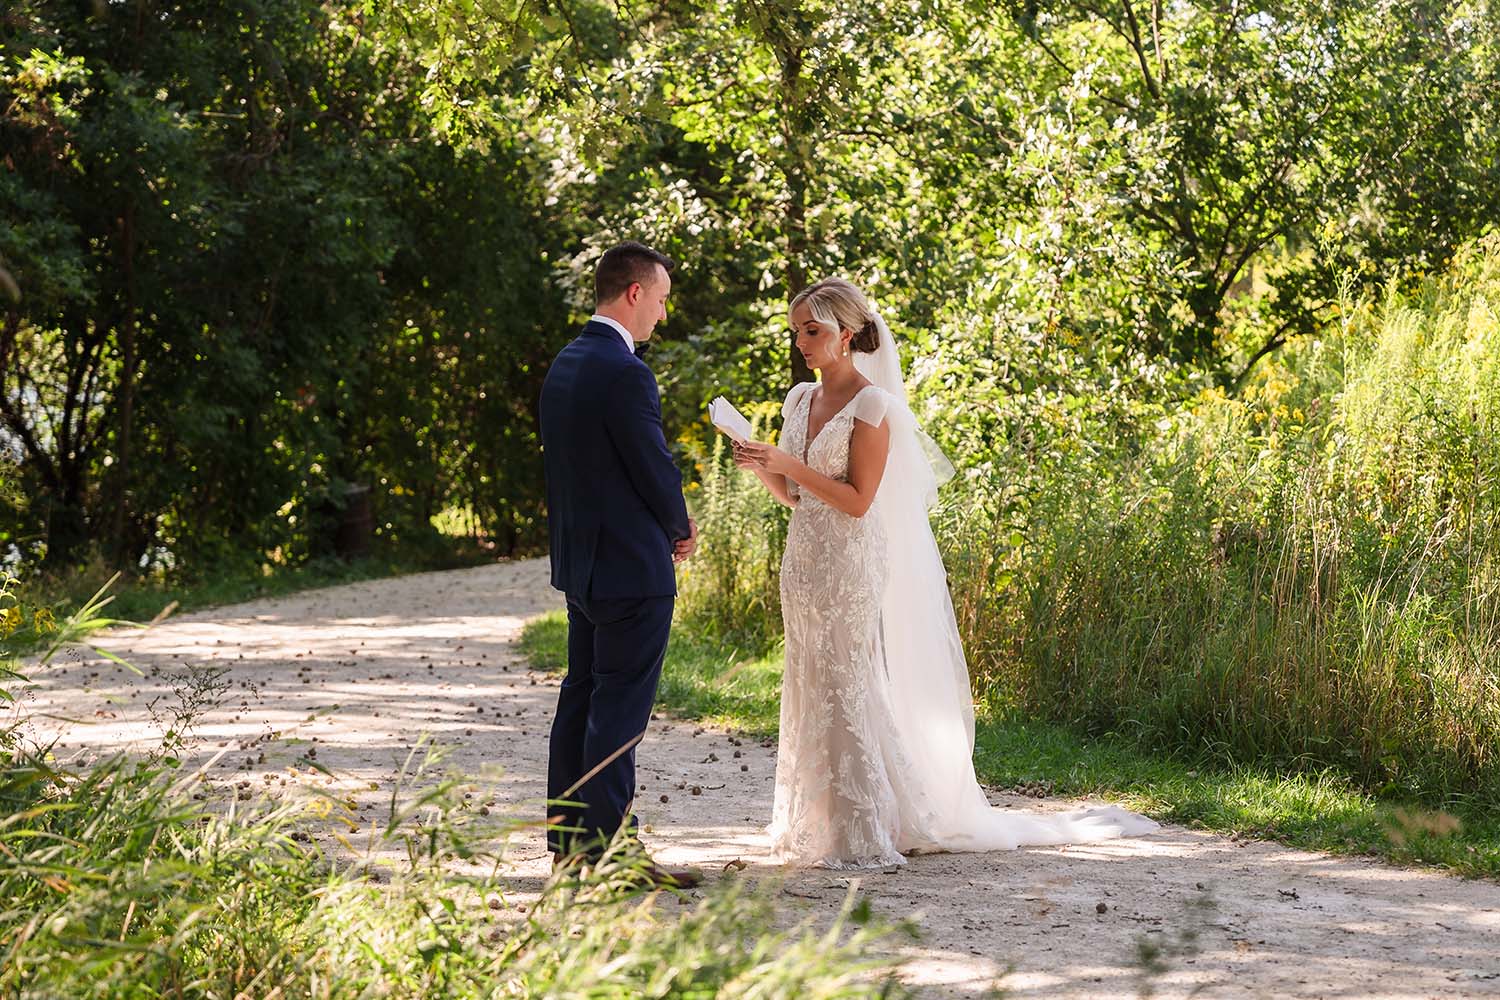 Bride and groom private first look at Mayslake Forest Preserve in Oak Brook, IL